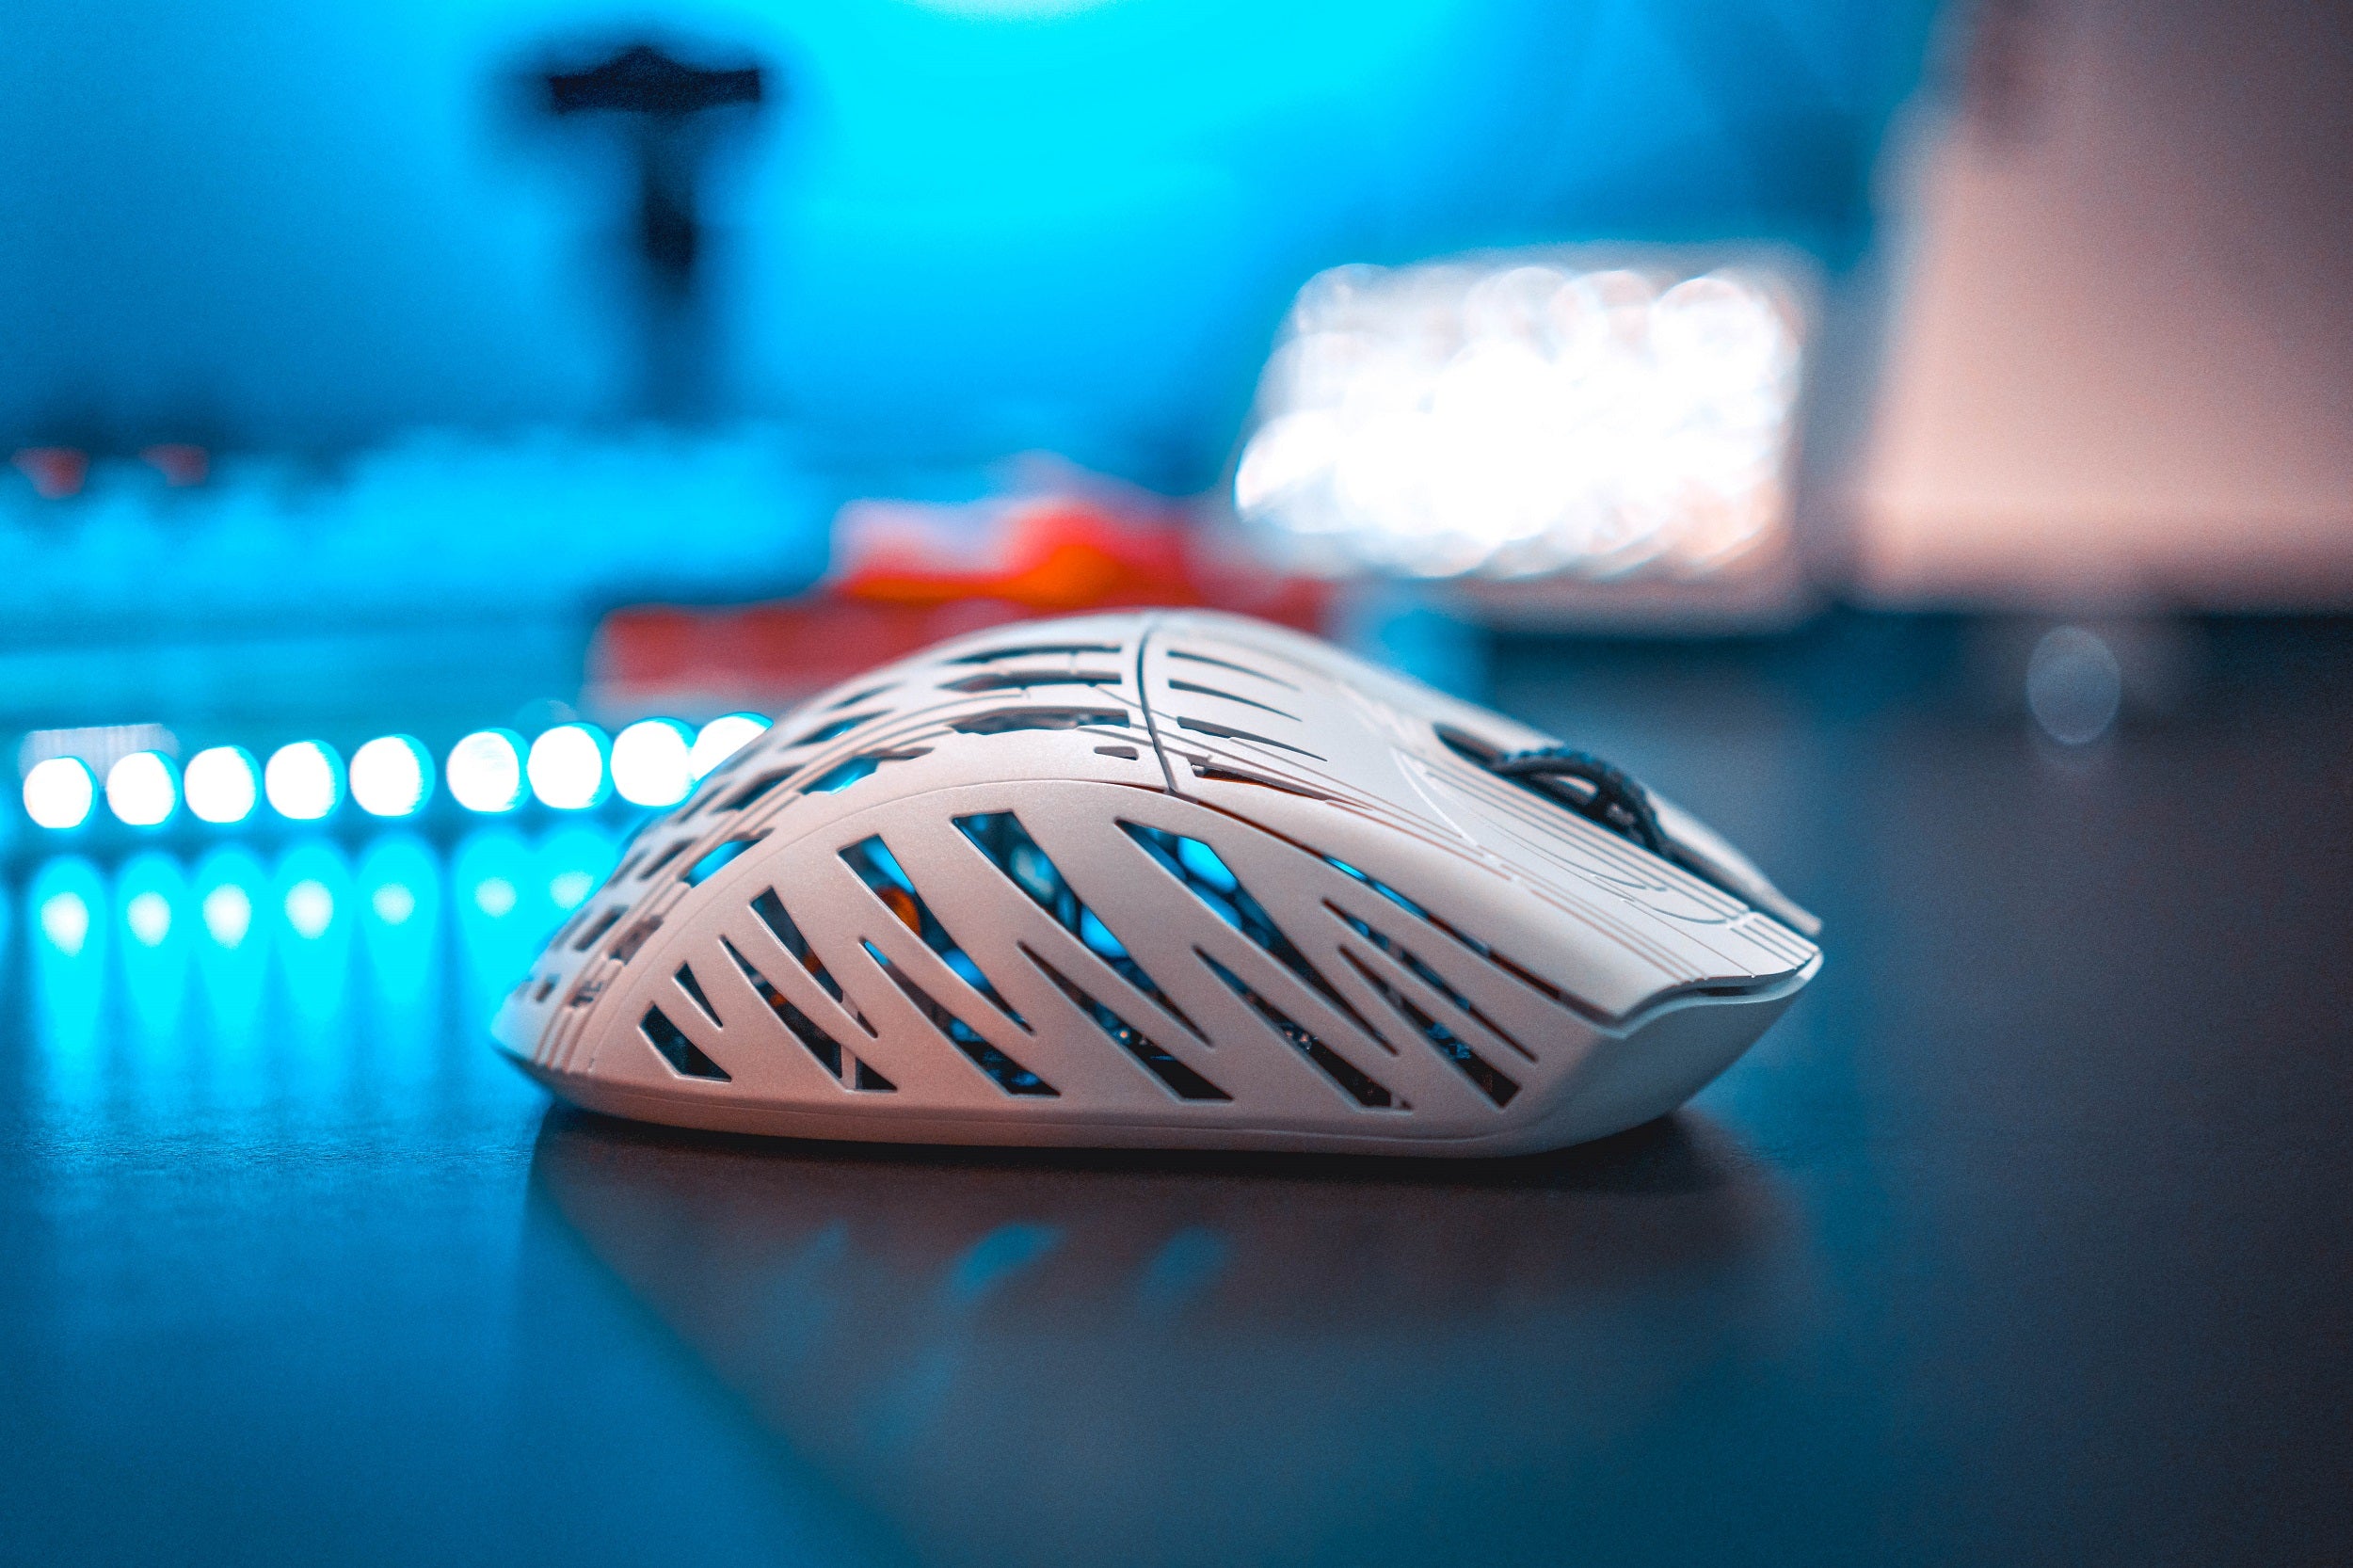 StormBreaker Gaming Mouse | Pwnage